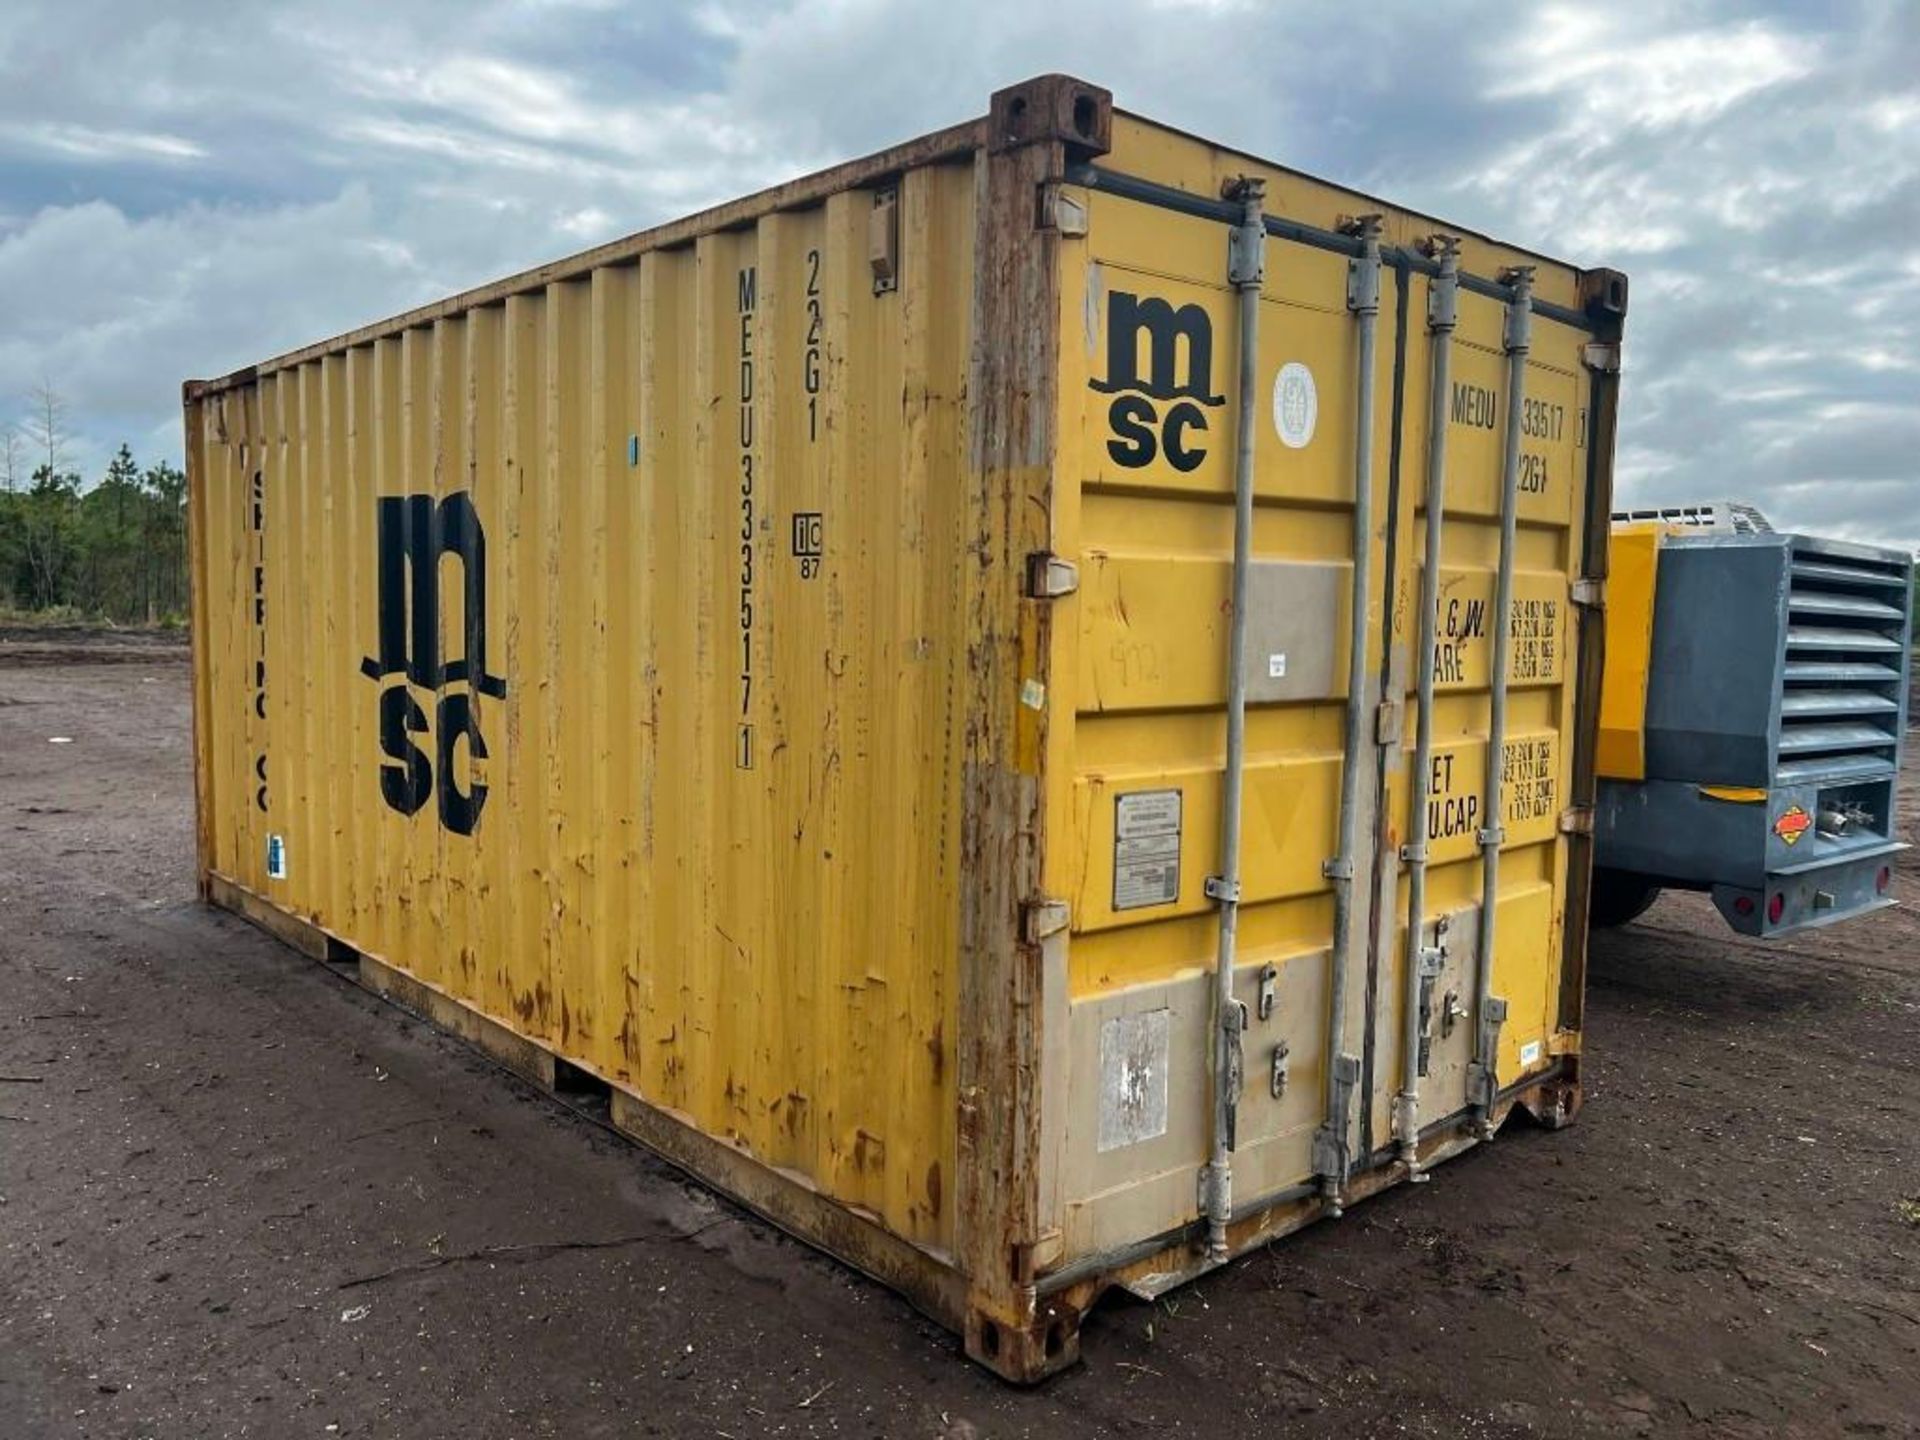 2008 20' Shipping Container